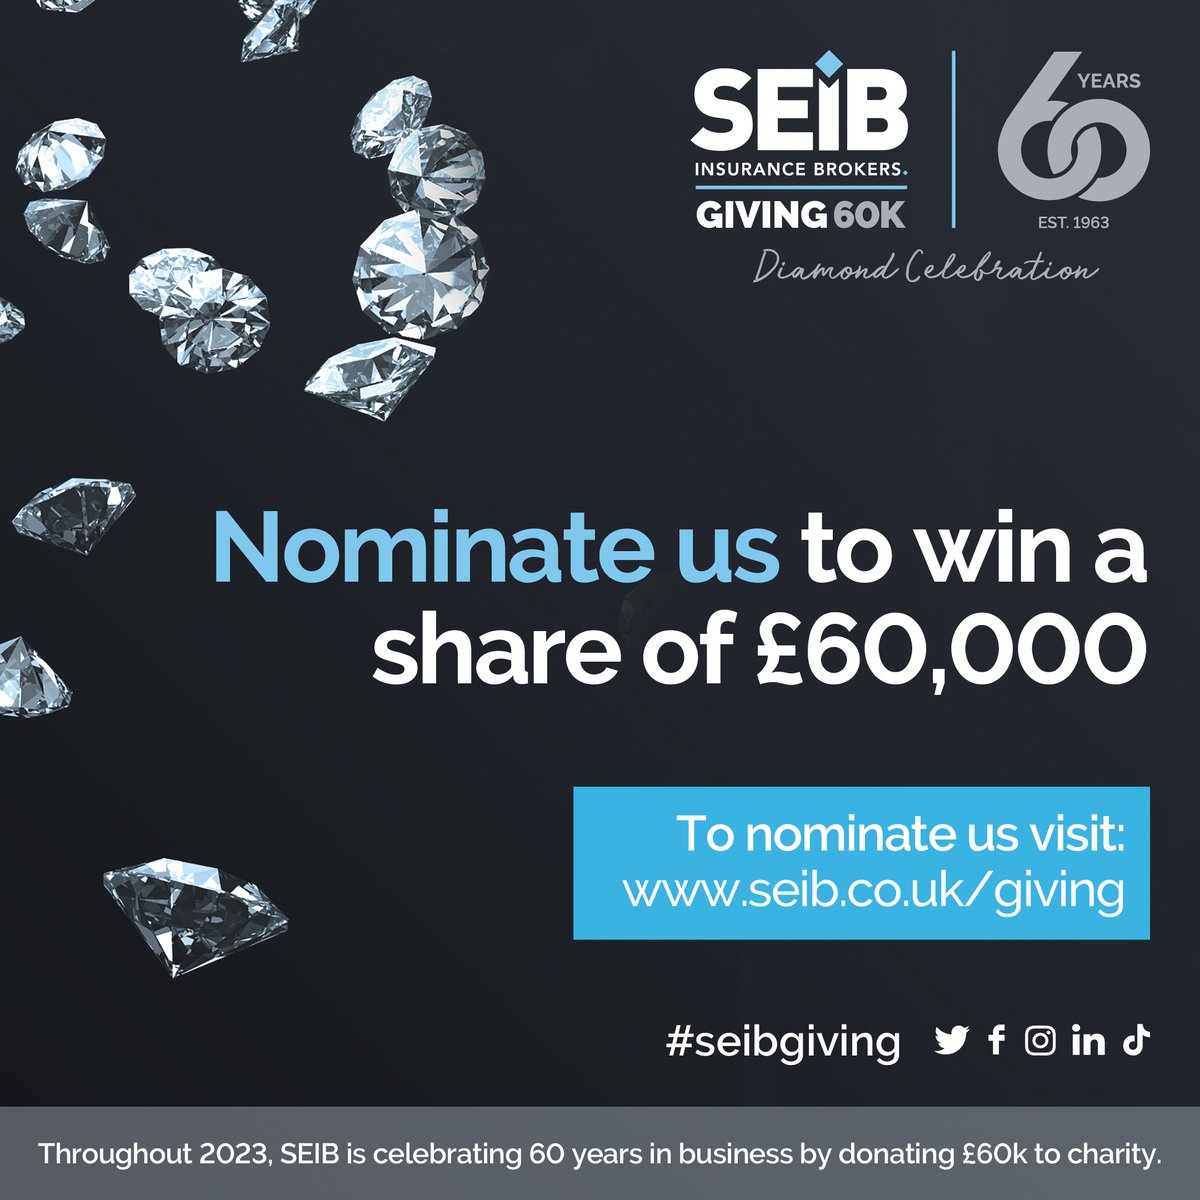 Will you help us win a share of £60,000? Nominate us in the @SEIB_Insurance 2023 give away by visiting seib.co.uk/giving and entering our charity number 513615! THANK YOU for supporting our work for nature's recovery across Birmingham and the Black Country 💚 #SEIBGiving